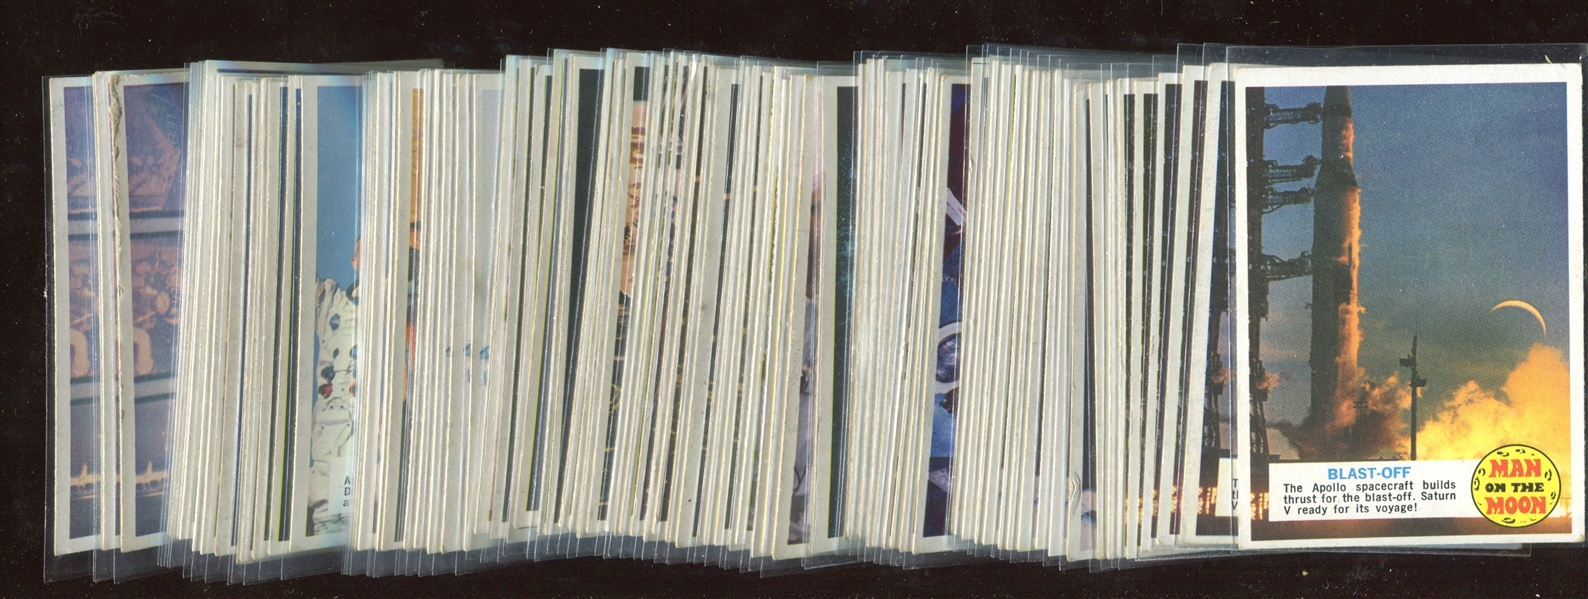 1969 Topps Man on the Moon Mixed Lot of (200+) High Grade Cards